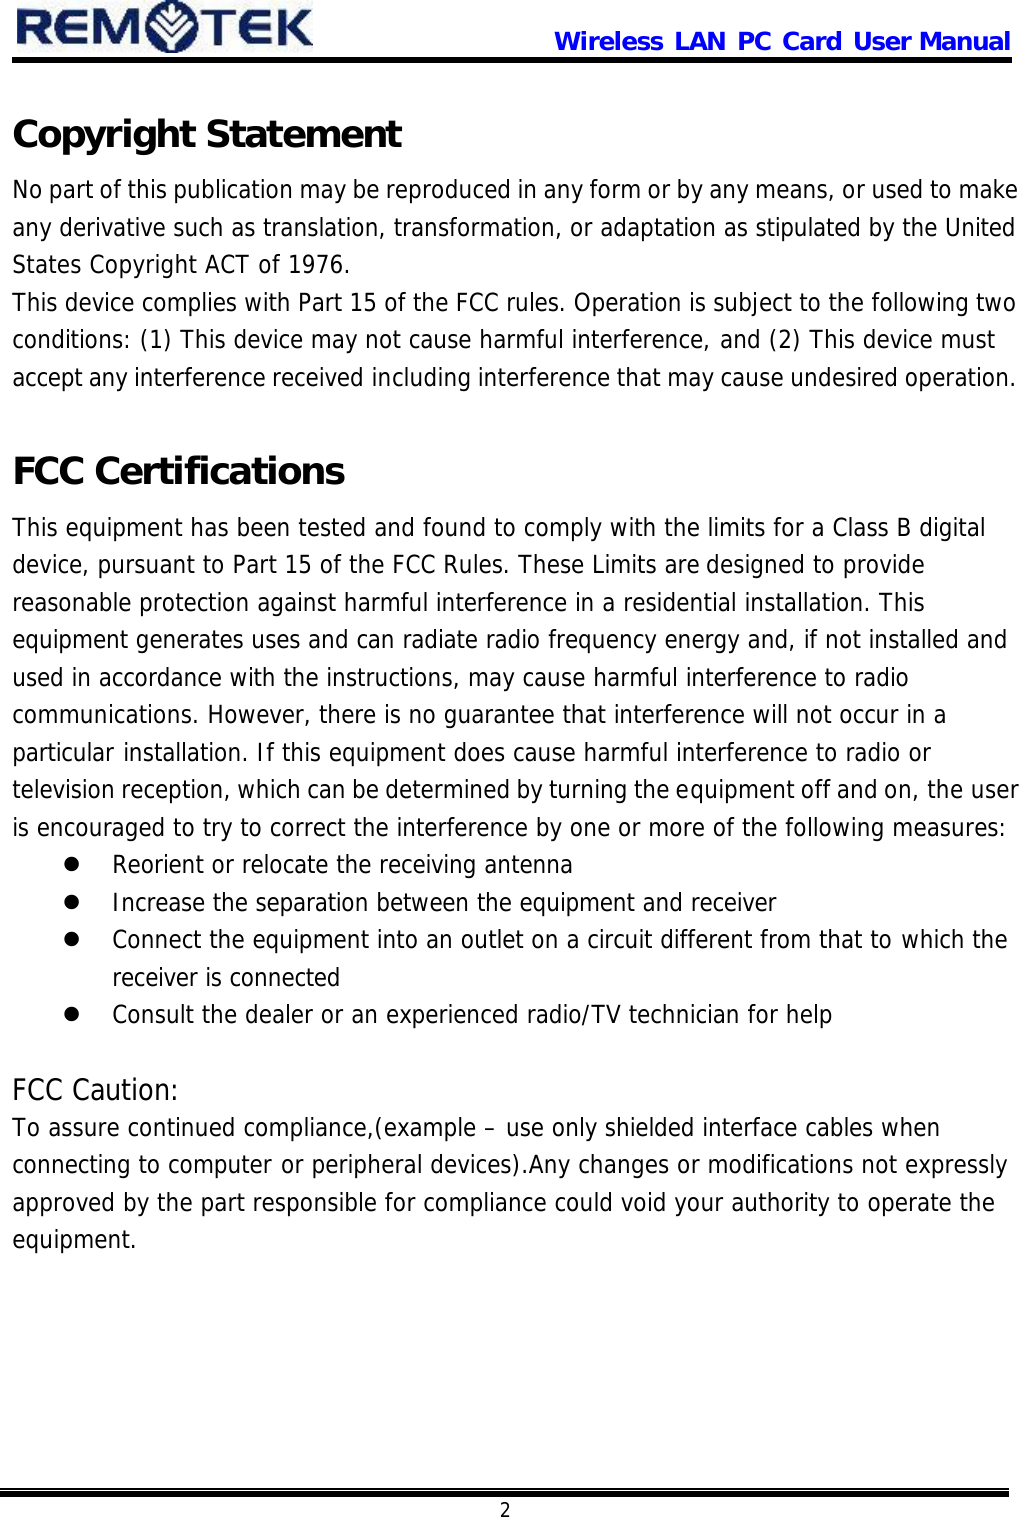                      Wireless LAN PC Card User Manual            2  Copyright Statement No part of this publication may be reproduced in any form or by any means, or used to make any derivative such as translation, transformation, or adaptation as stipulated by the United States Copyright ACT of 1976. This device complies with Part 15 of the FCC rules. Operation is subject to the following two conditions: (1) This device may not cause harmful interference, and (2) This device must accept any interference received including interference that may cause undesired operation.  FCC Certifications This equipment has been tested and found to comply with the limits for a Class B digital device, pursuant to Part 15 of the FCC Rules. These Limits are designed to provide reasonable protection against harmful interference in a residential installation. This equipment generates uses and can radiate radio frequency energy and, if not installed and used in accordance with the instructions, may cause harmful interference to radio communications. However, there is no guarantee that interference will not occur in a particular installation. If this equipment does cause harmful interference to radio or television reception, which can be determined by turning the equipment off and on, the user is encouraged to try to correct the interference by one or more of the following measures: l Reorient or relocate the receiving antenna l Increase the separation between the equipment and receiver l Connect the equipment into an outlet on a circuit different from that to which the receiver is connected l Consult the dealer or an experienced radio/TV technician for help  FCC Caution: To assure continued compliance,(example – use only shielded interface cables when connecting to computer or peripheral devices).Any changes or modifications not expressly approved by the part responsible for compliance could void your authority to operate the equipment.